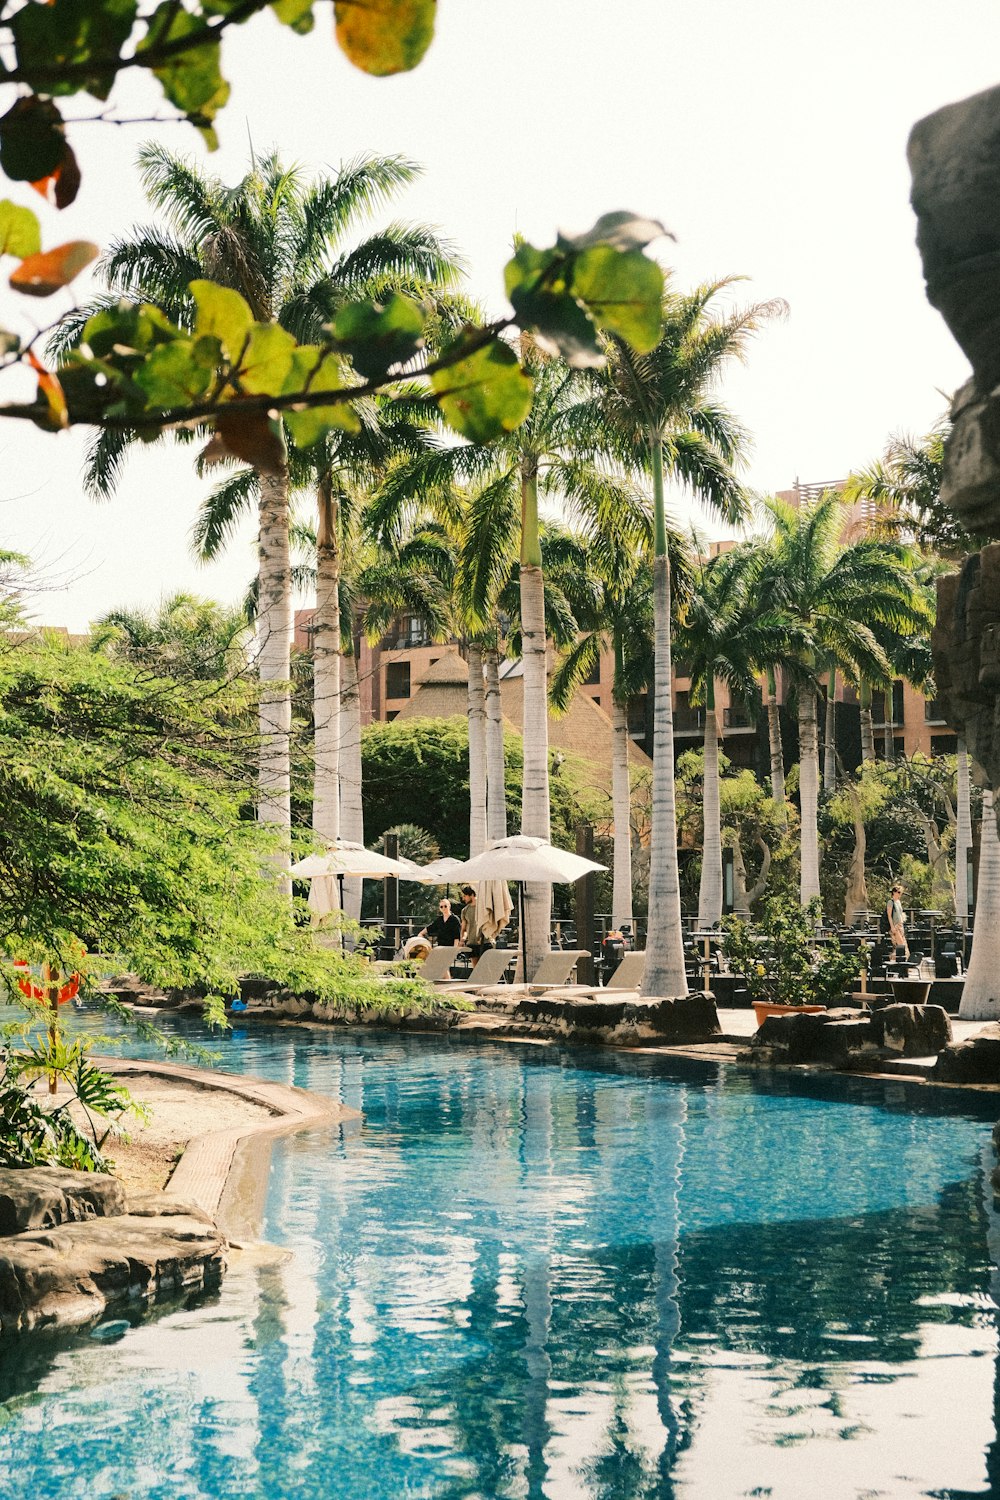 a pool surrounded by palm trees and umbrellas